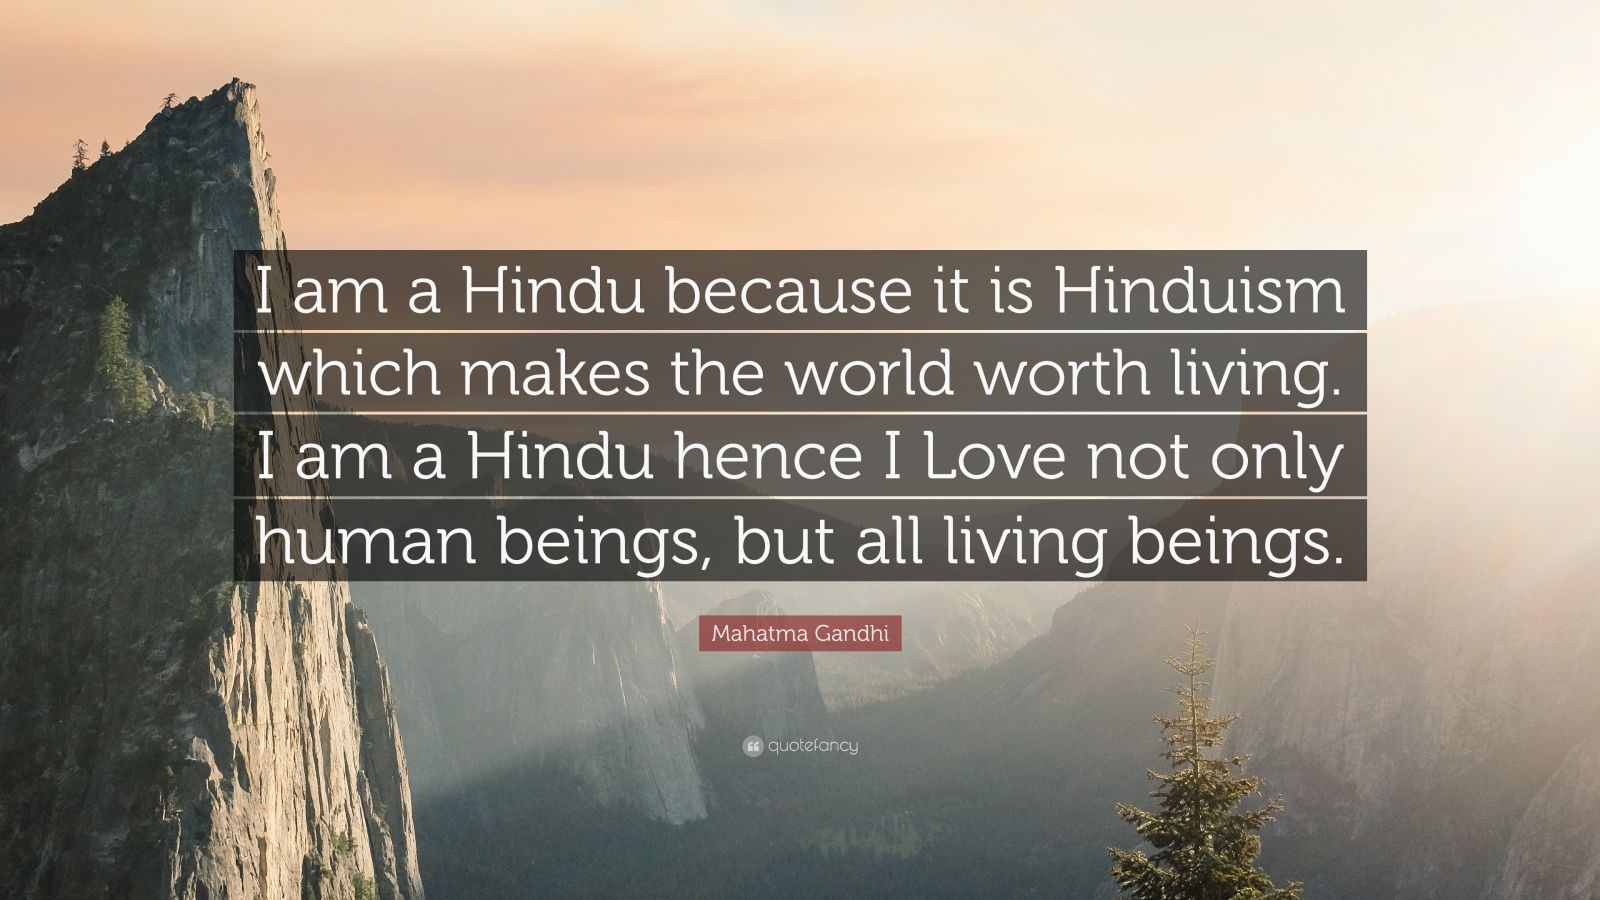 Mahatma Gandhi Quote: “I am a Hindu because it is Hinduism which makes